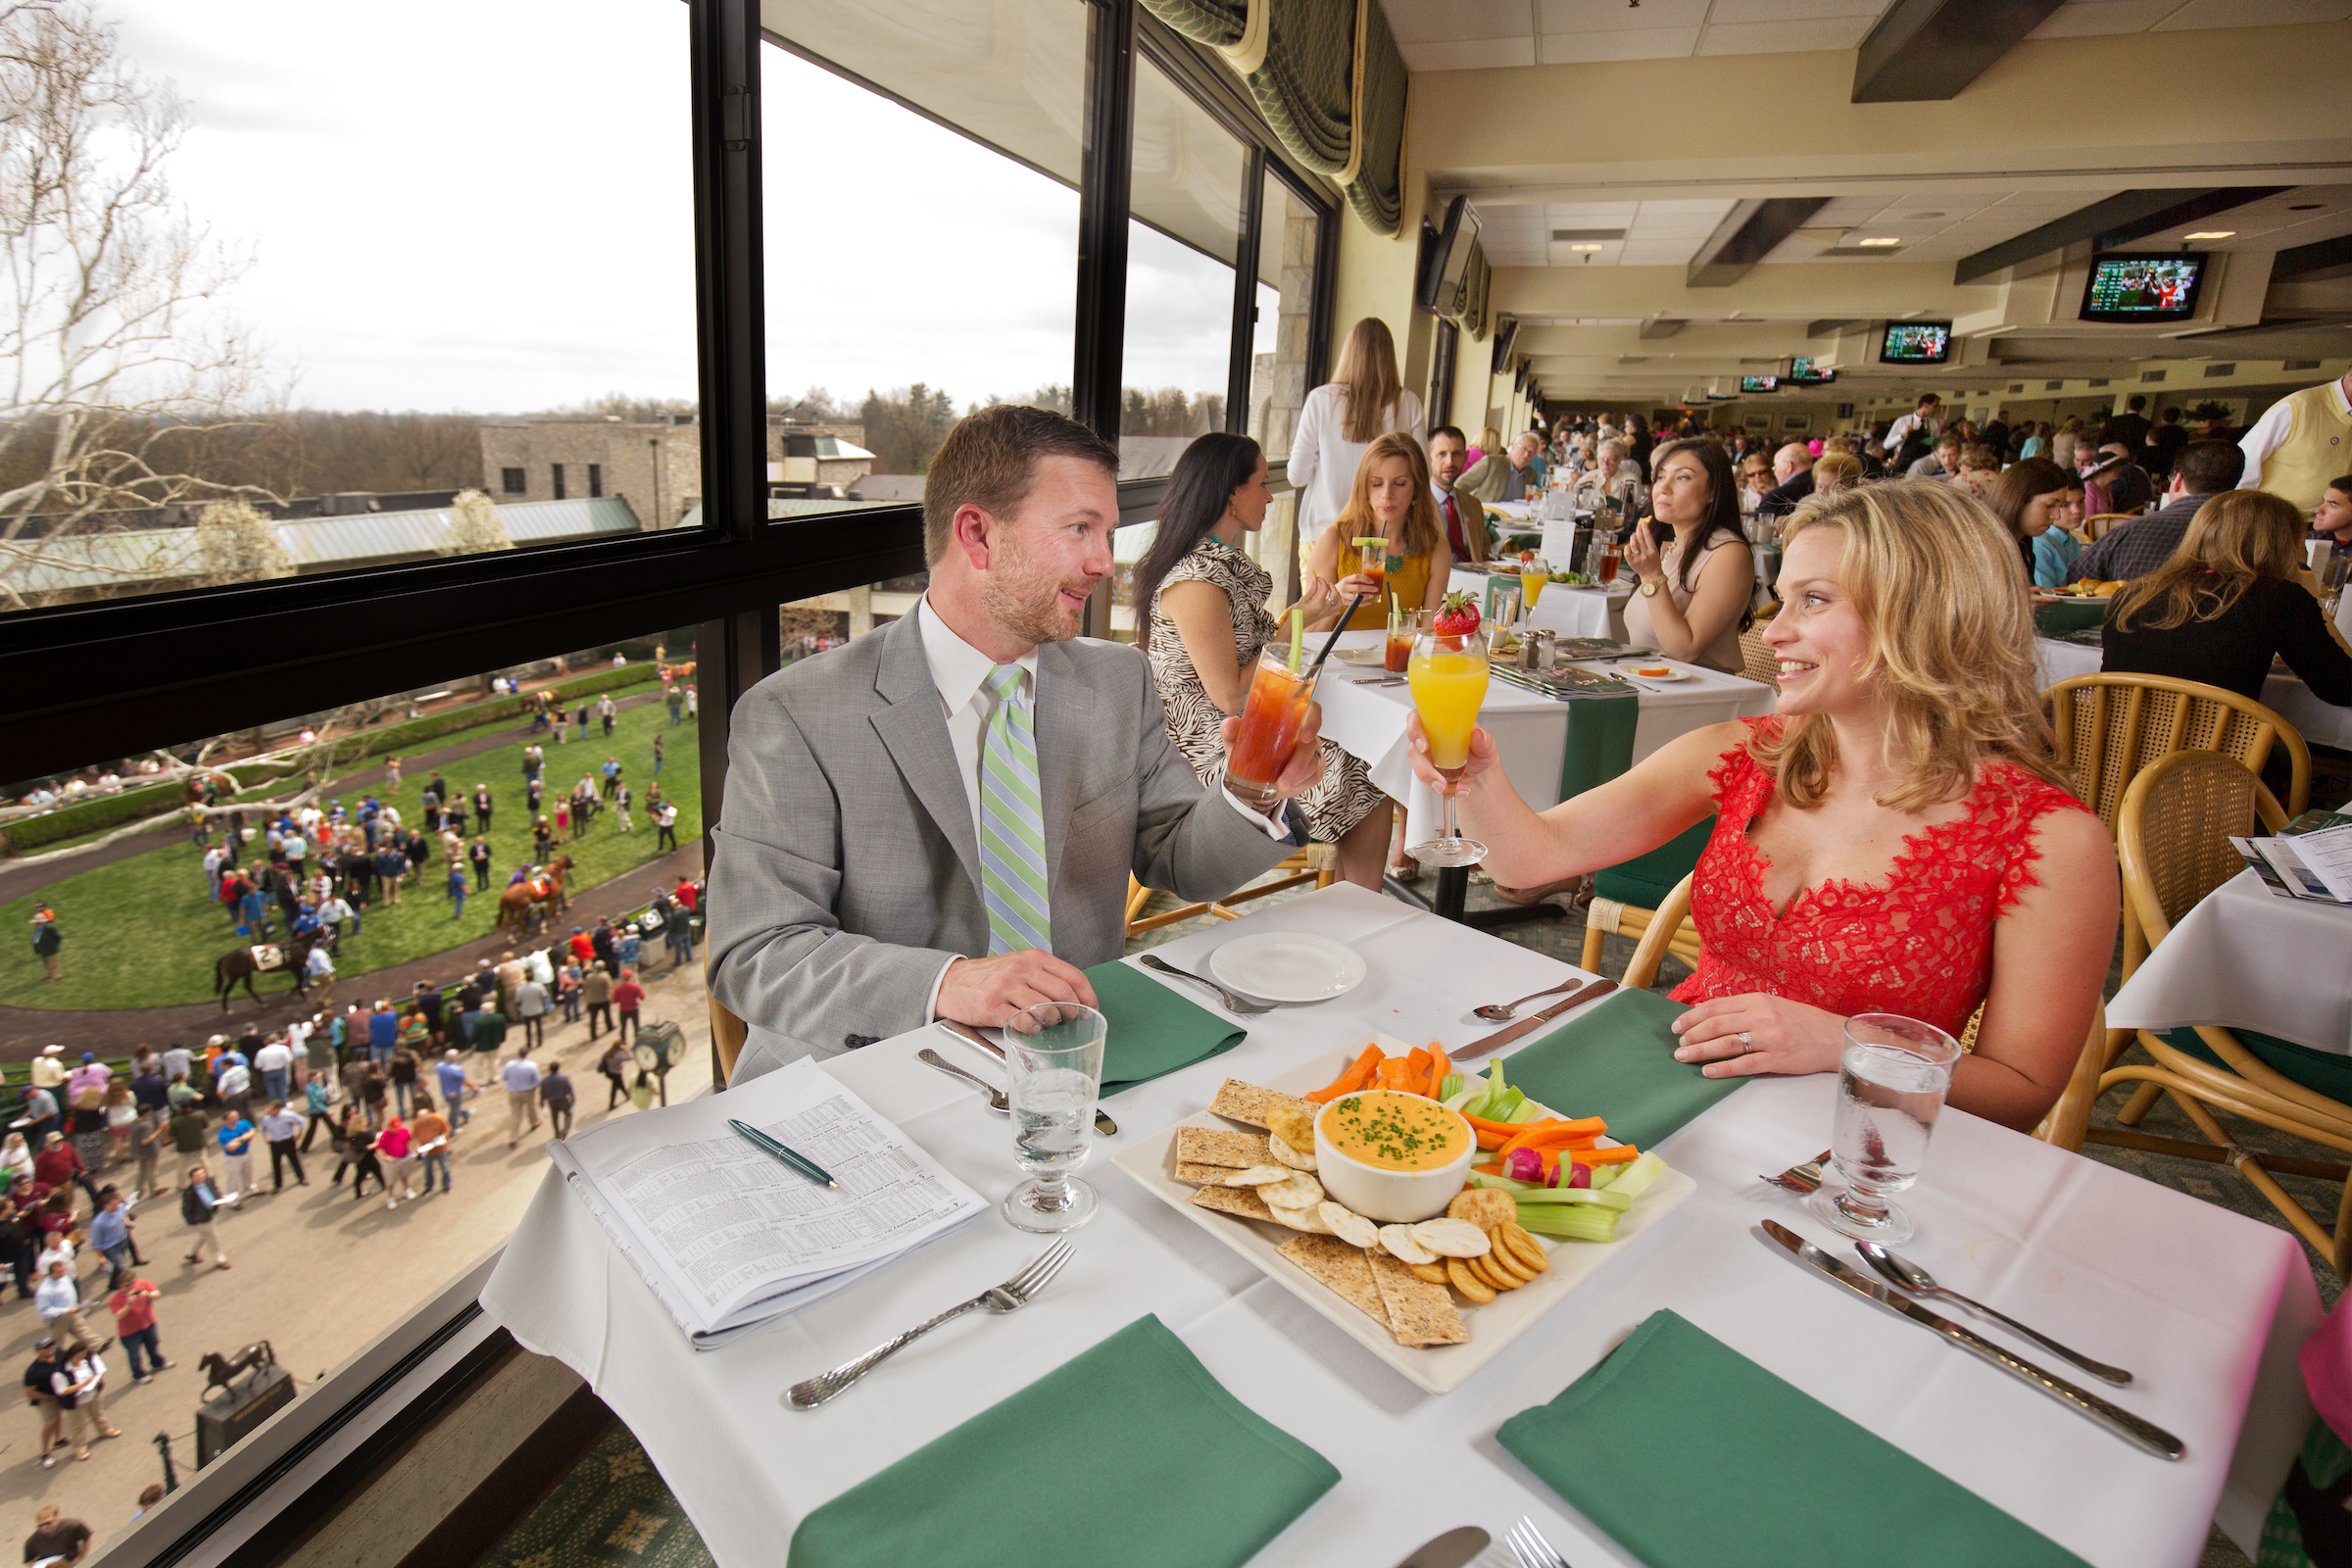 keeneland clubhouse dining room